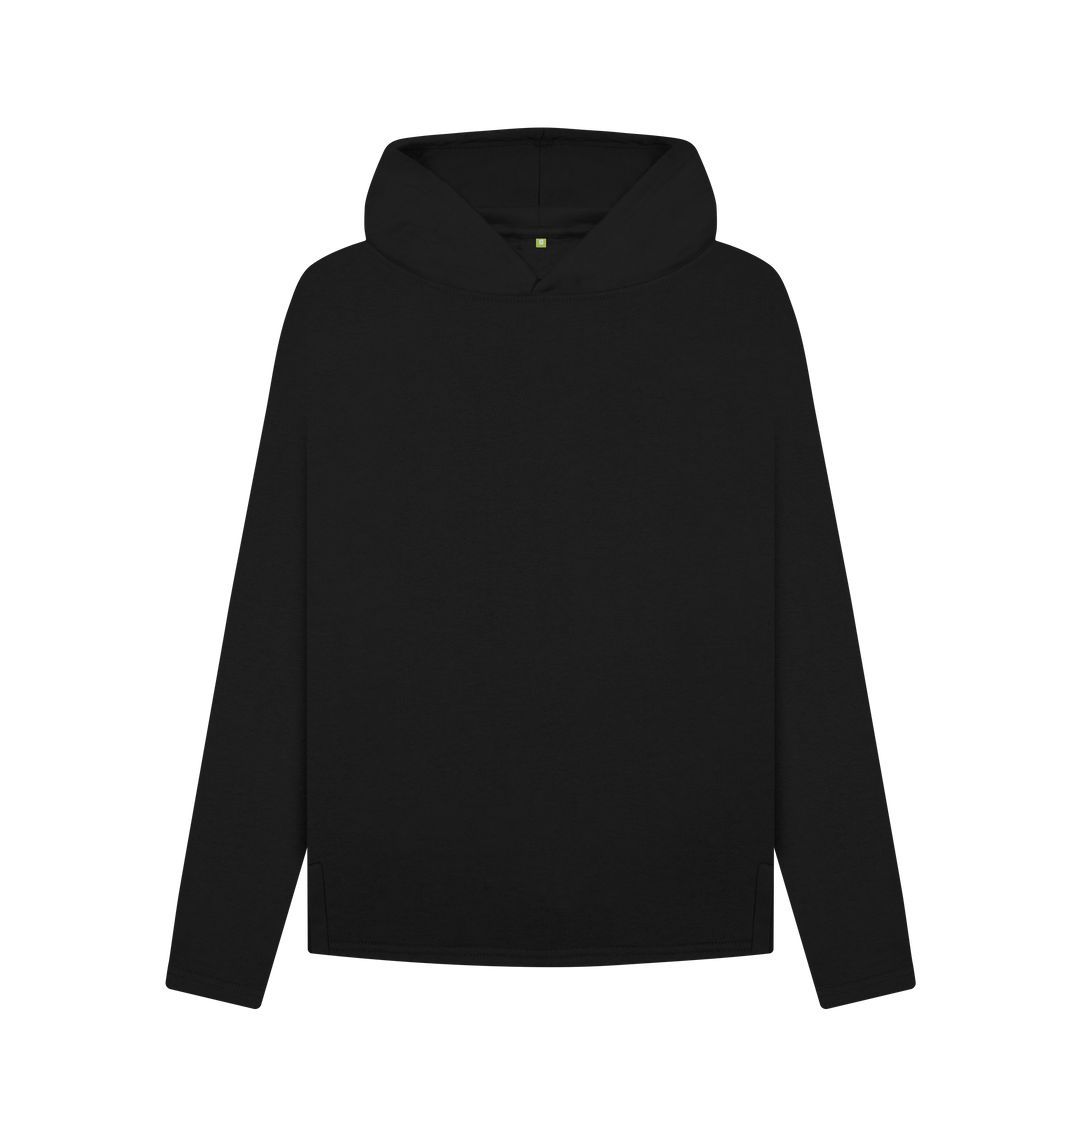 Black Women's organic cotton relaxed fit hoodie